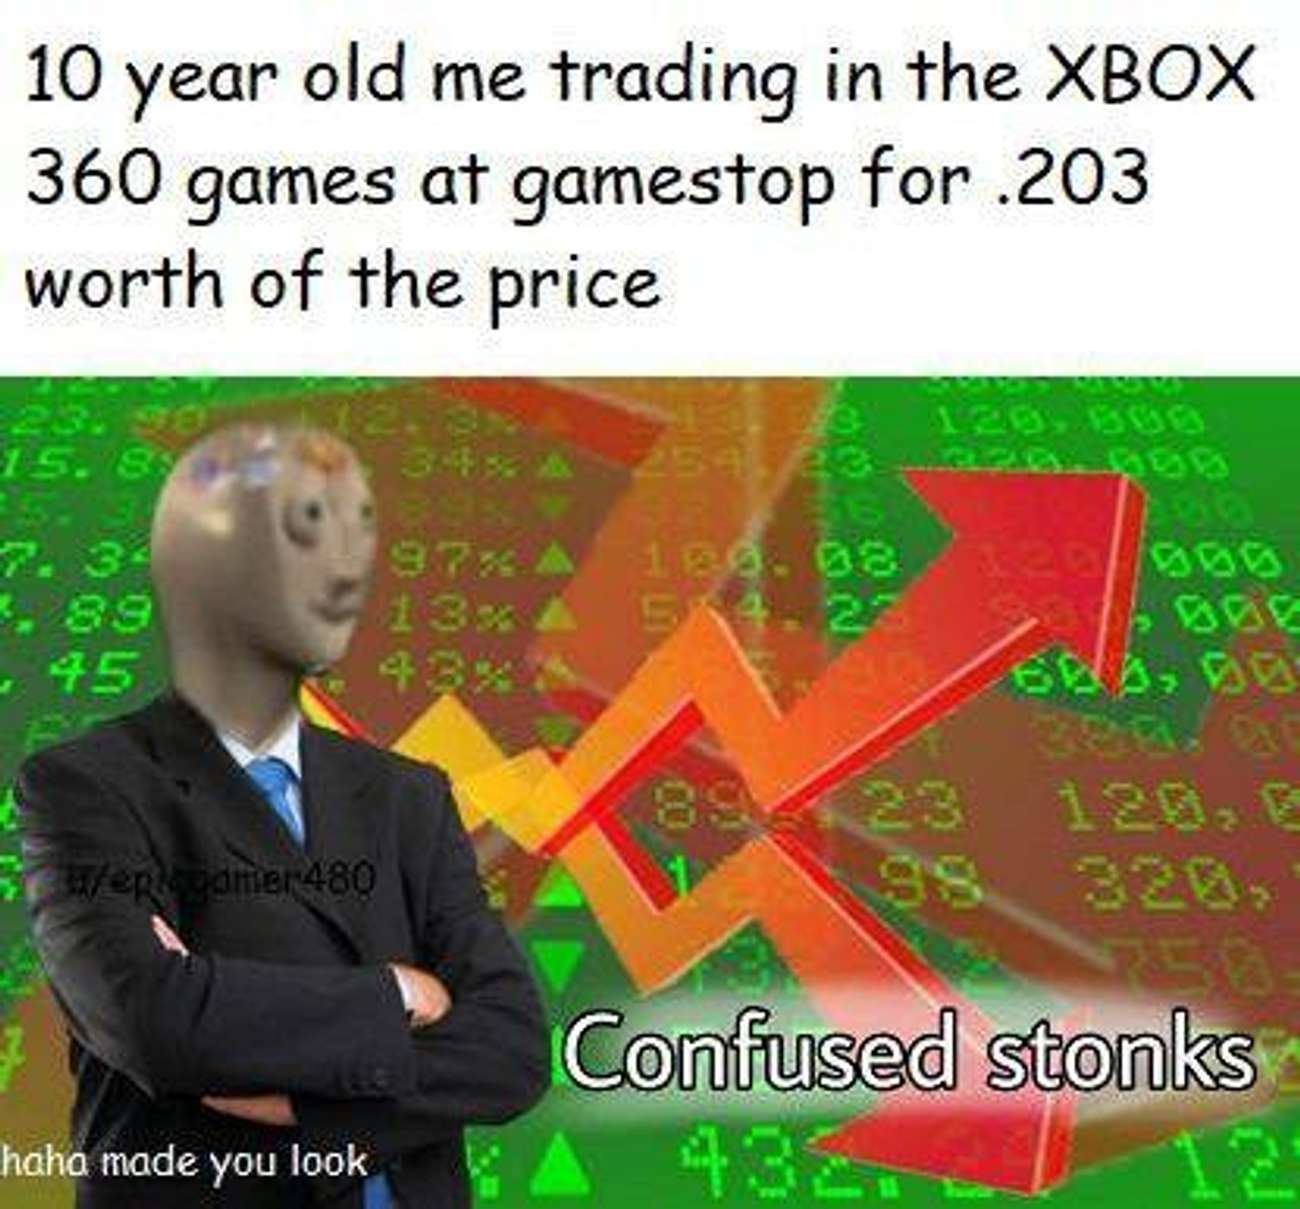 stonks meme - 10 year old me trading in the Xbox 360 games at gamestop for .203 worth of the price 1293 2523 15. 83 13% 54.25 45 Wert der 480 Confused stonks haha made you look